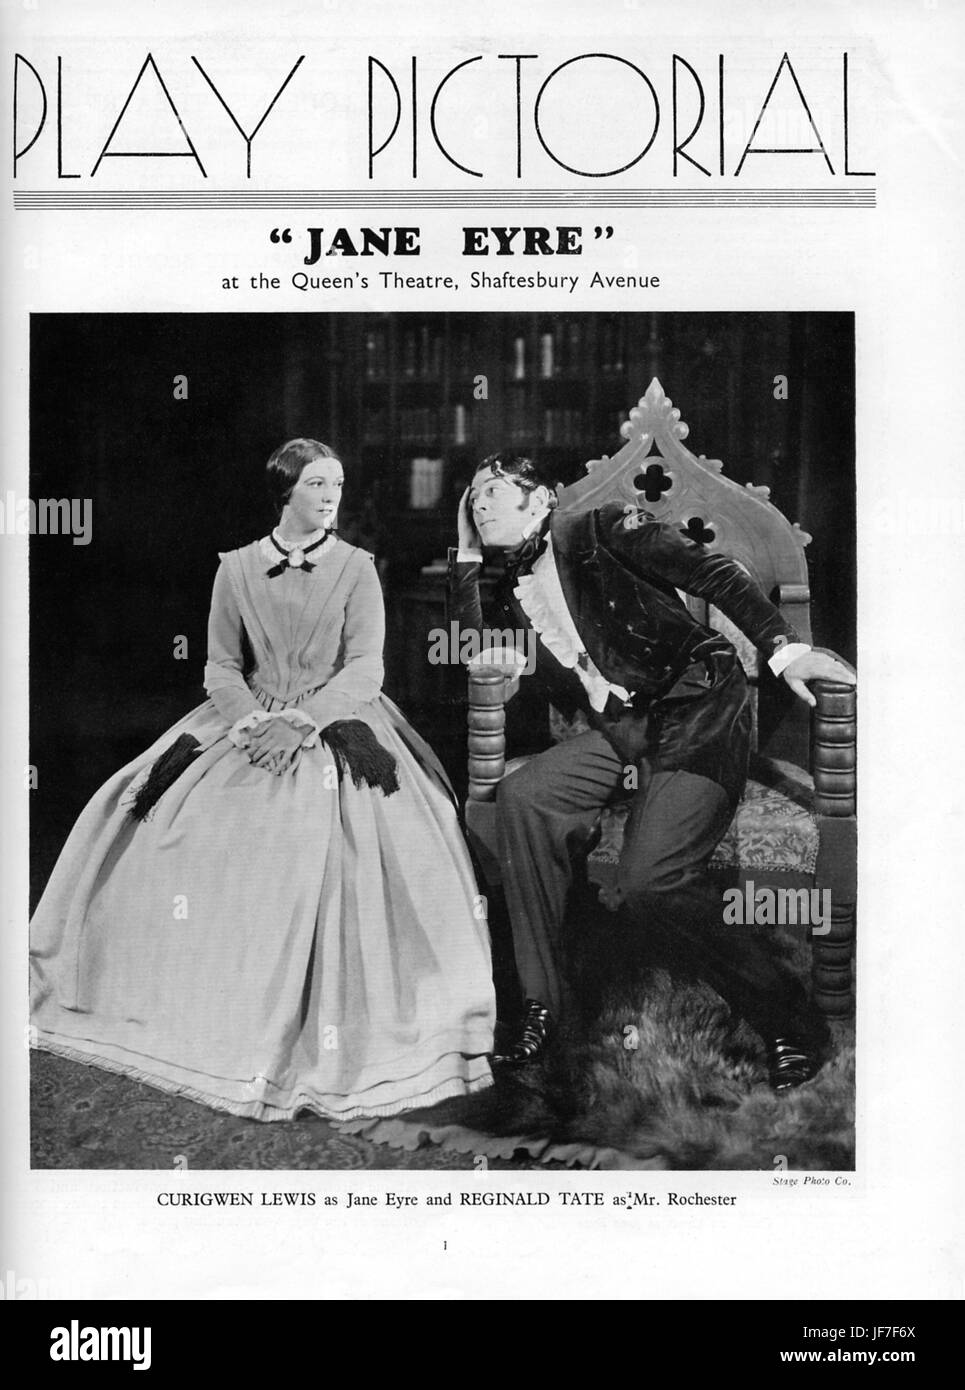 'Jane Eyre' with Curigwen Lewis as Jane and Reginald Tate as Mr Rochester, in Cyril Phillips 's production at the Queen's Theatre, London, 1936.  Based on the novel by Charlotte Bronte. RT, English actor, 13 December 1896 – 23 August 1955. Stock Photo